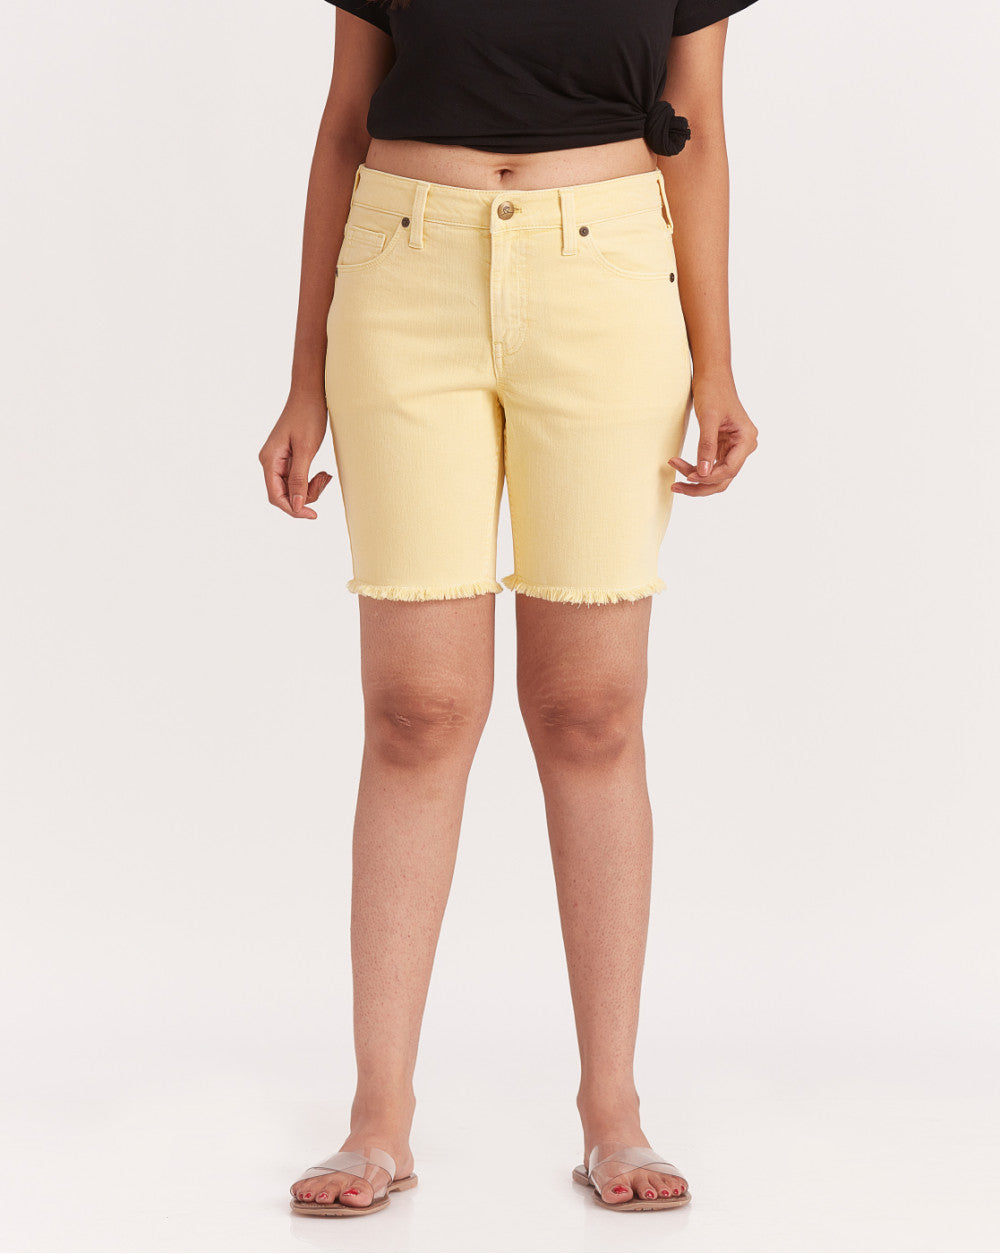 Mid Rise Colored Shorts - Daffodil Yellow